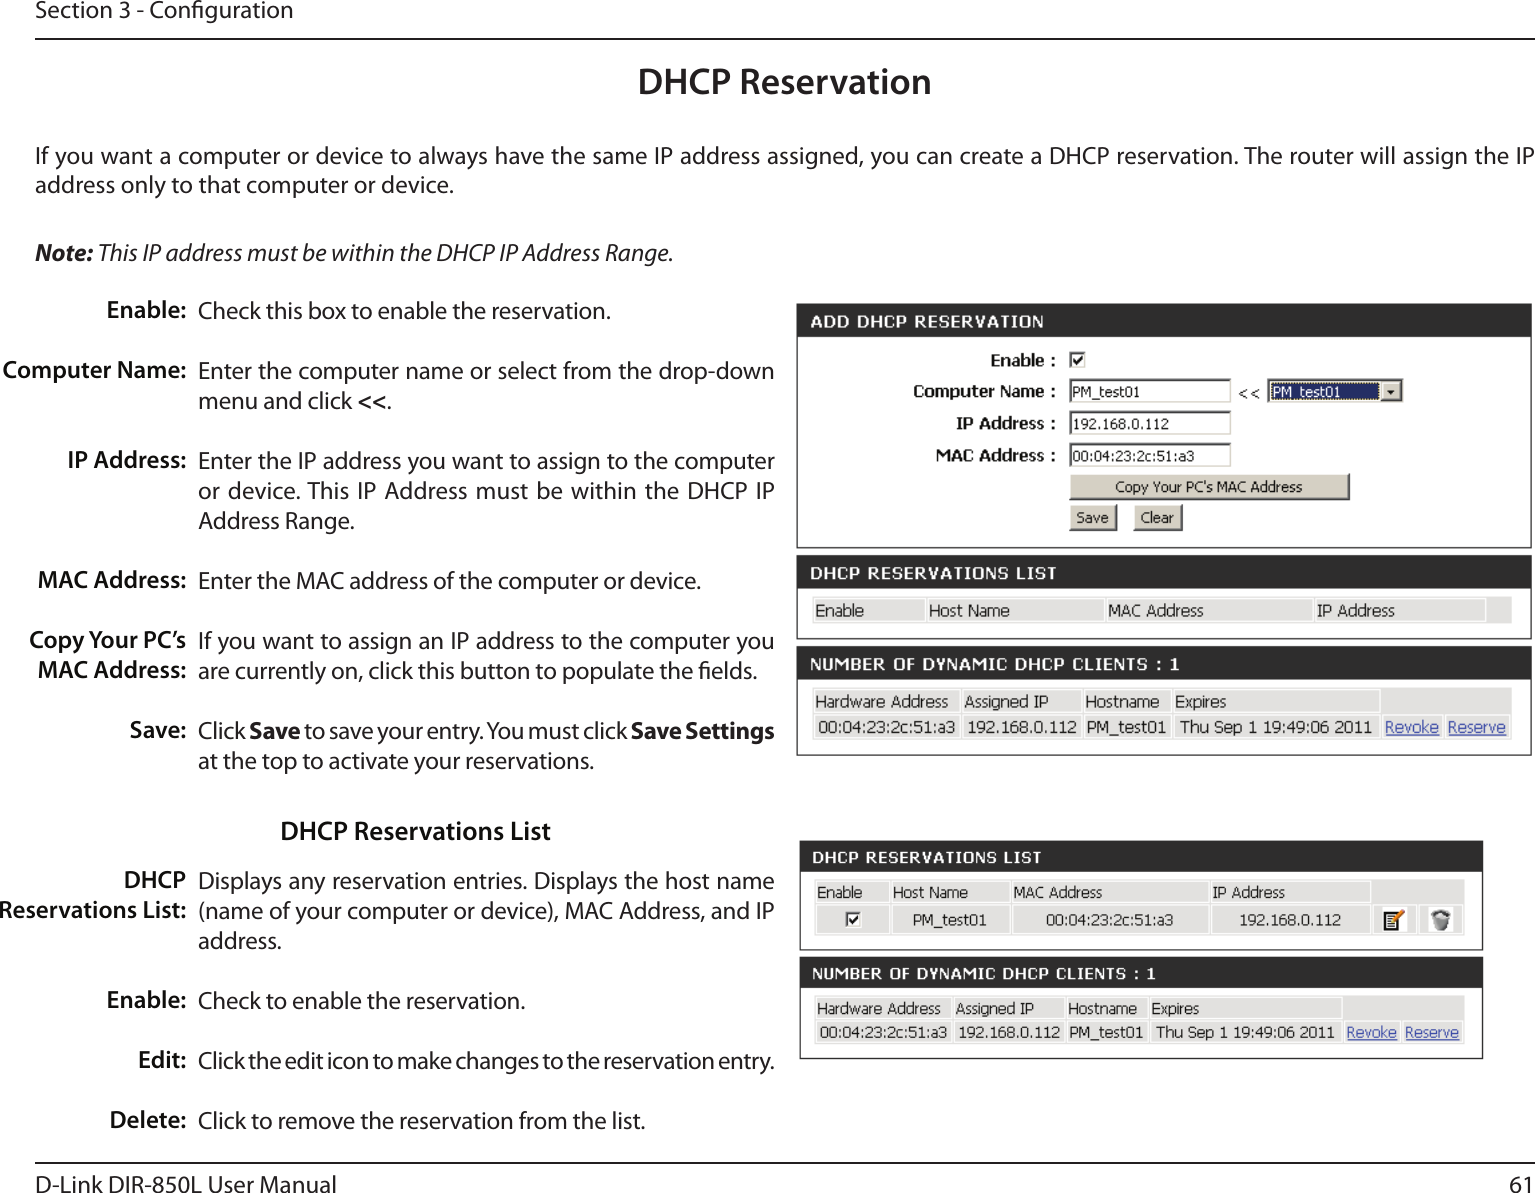 61D-Link DIR-850L User ManualSection 3 - CongurationDHCP ReservationIf you want a computer or device to always have the same IP address assigned, you can create a DHCP reservation. The router will assign the IP address only to that computer or device. Note: This IP address must be within the DHCP IP Address Range.Check this box to enable the reservation.Enter the computer name or select from the drop-down menu and click &lt;&lt;.Enter the IP address you want to assign to the computer or device. This IP Address must  be within the DHCP IP Address Range.Enter the MAC address of the computer or device.If you want to assign an IP address to the computer you are currently on, click this button to populate the elds. Click Save to save your entry. You must click Save Settings at the top to activate your reservations. Displays any reservation entries. Displays the host name (name of your computer or device), MAC Address, and IP address.Check to enable the reservation.Click the edit icon to make changes to the reservation entry.Click to remove the reservation from the list.Enable:Computer Name:IP Address:MAC Address:Copy Your PC’s MAC Address:Save:DHCP Reservations List:Enable:Edit:Delete:DHCP Reservations List